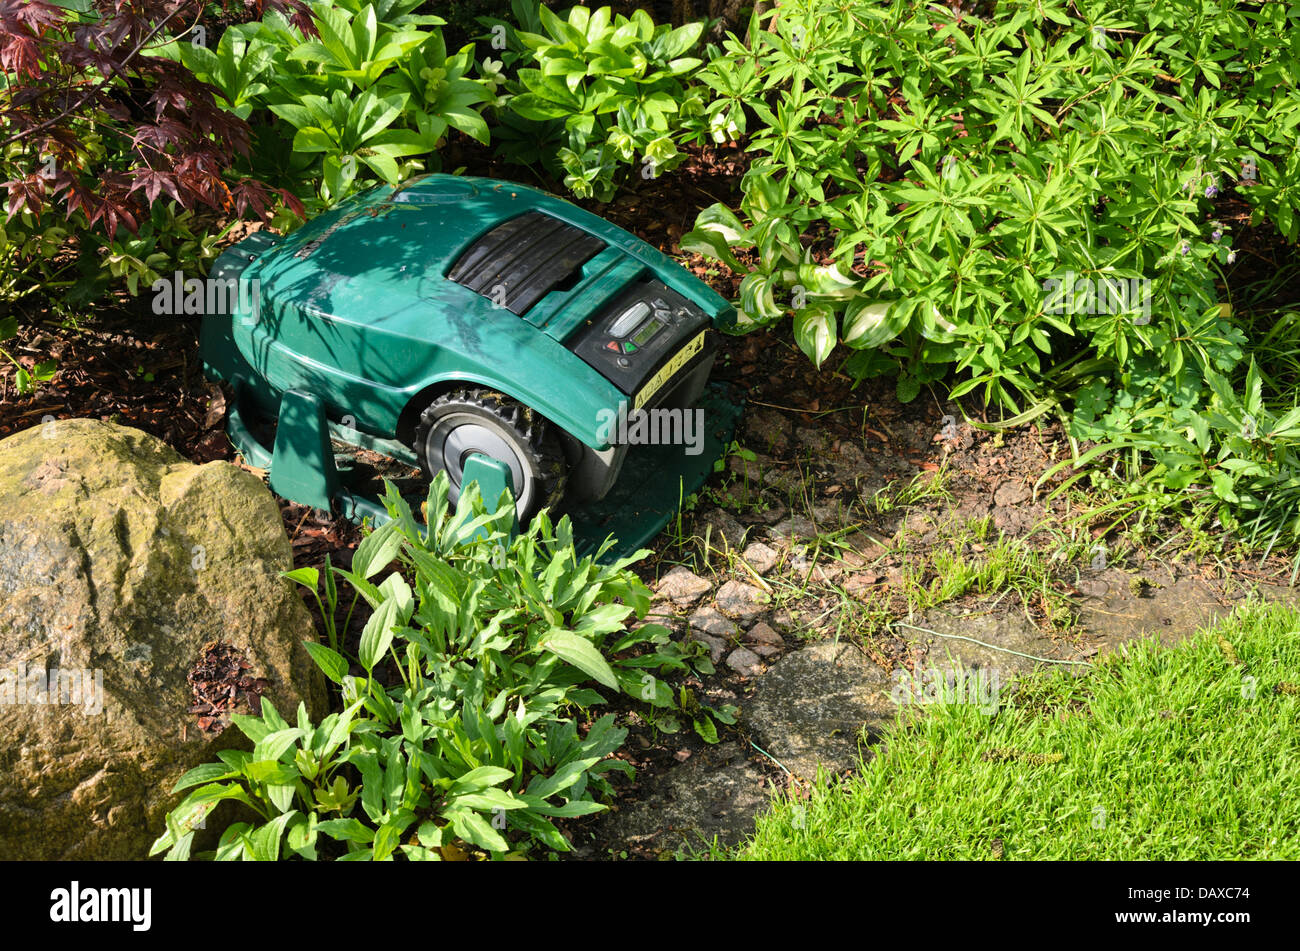 Robot lawn mower with charging station Stock Photo